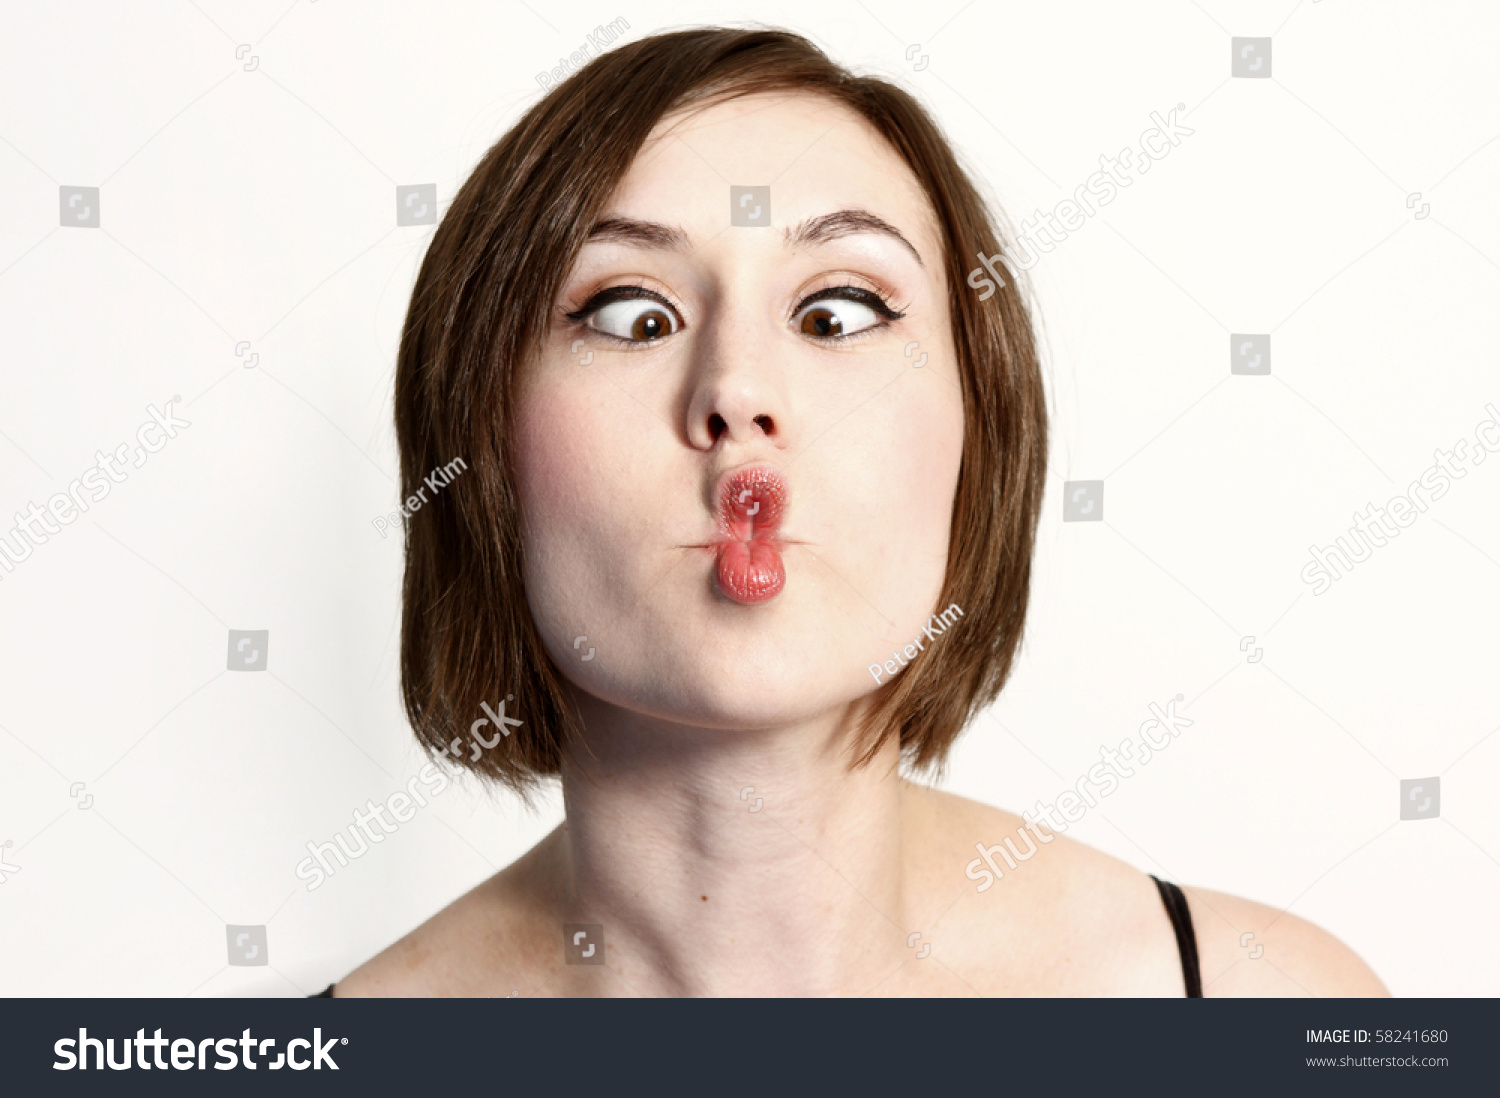 Woman Making A Funny Face Known As A